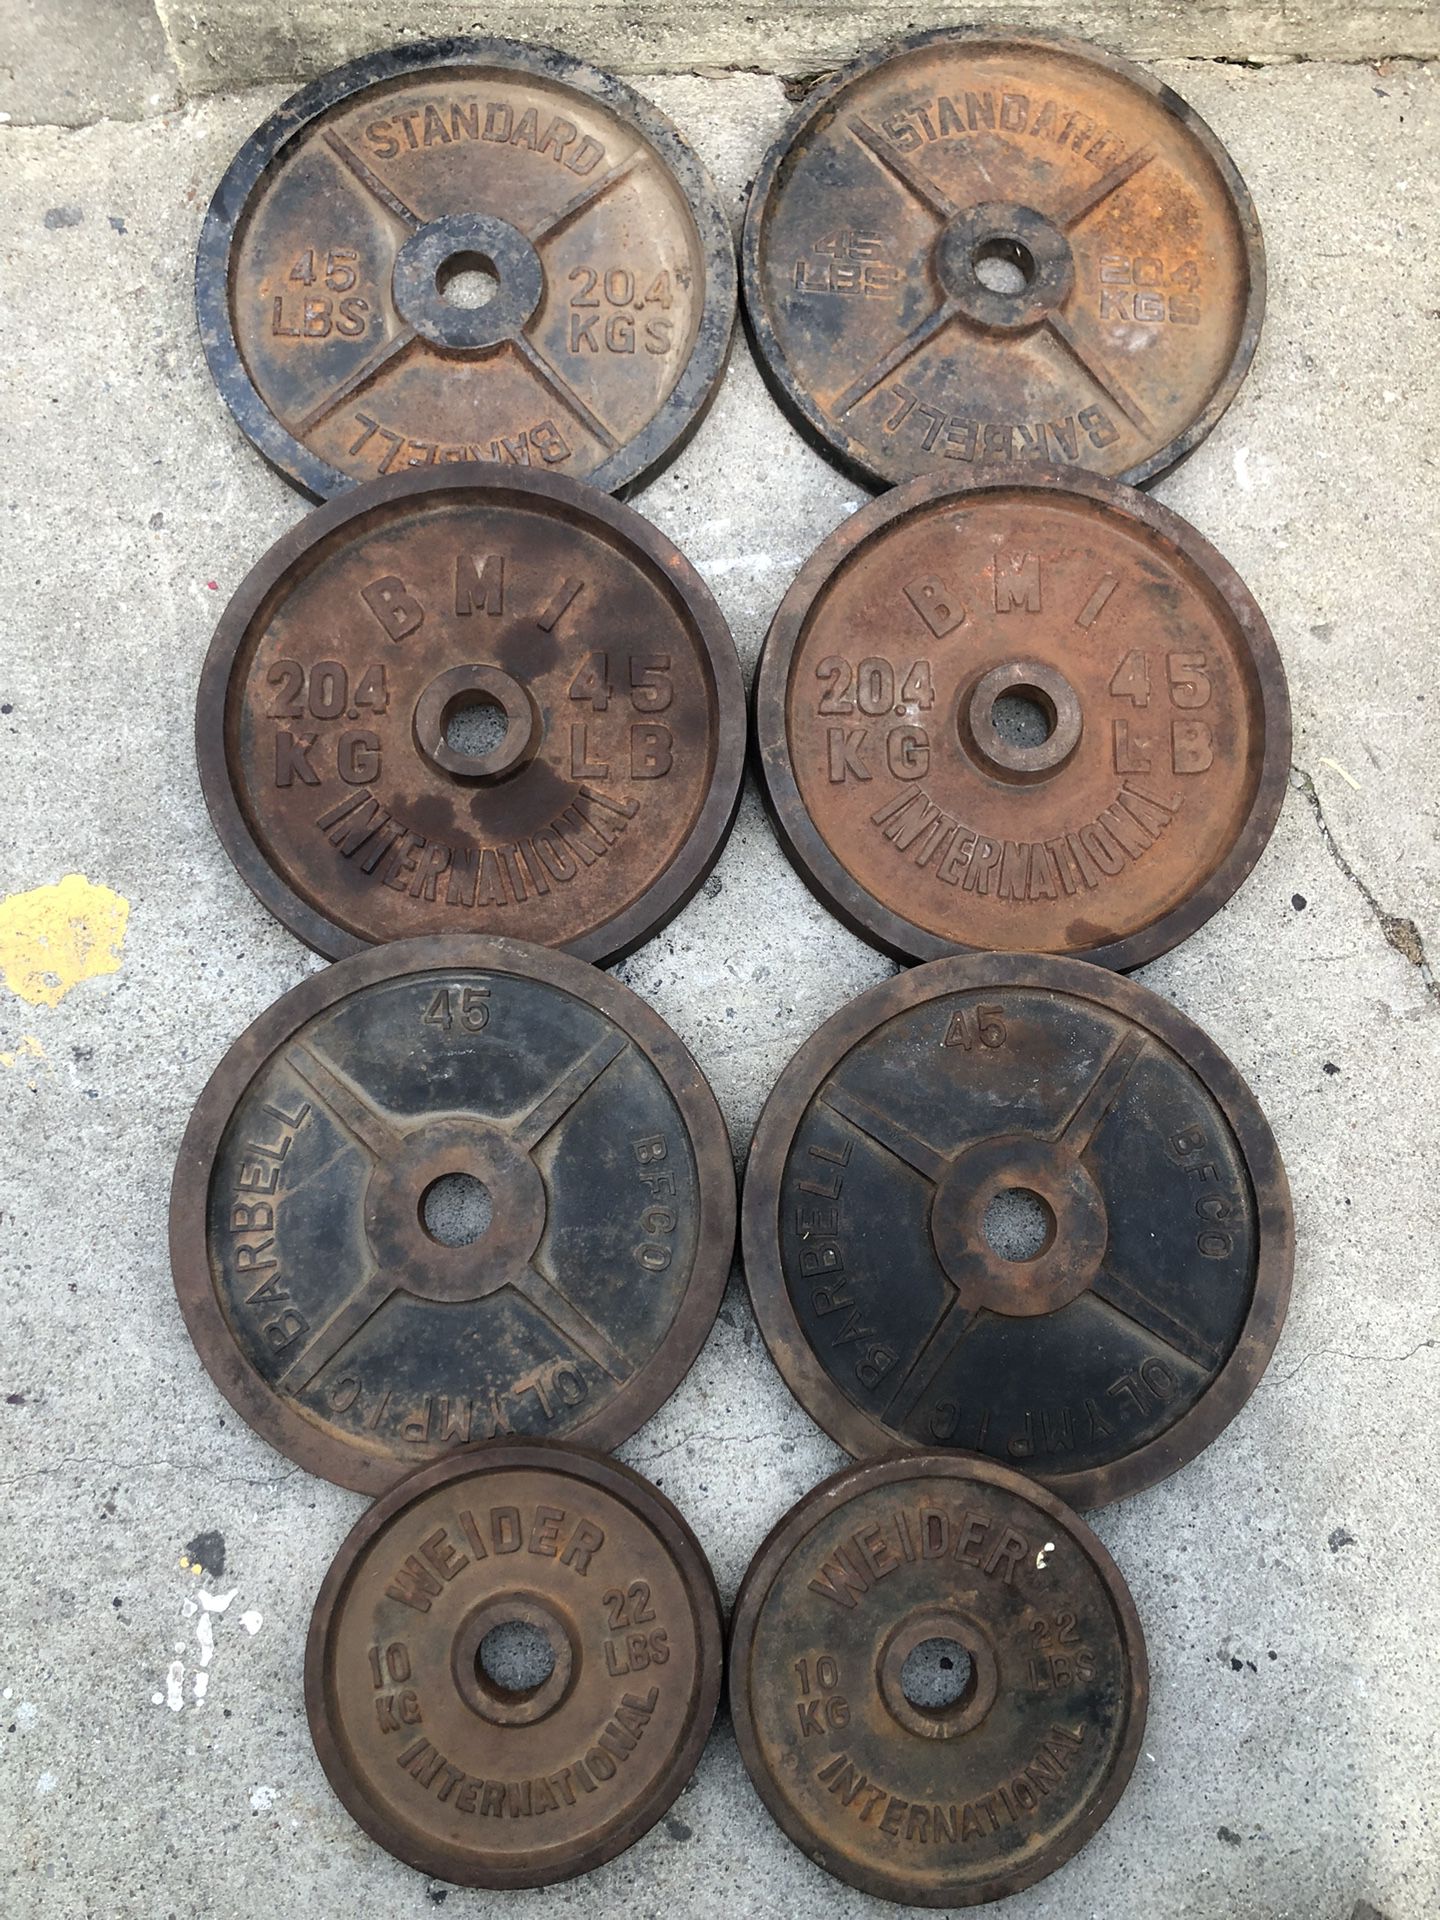 Olympic Weights Selling a Total Of 314lbs For $200 firm. There rusty but there solid weights